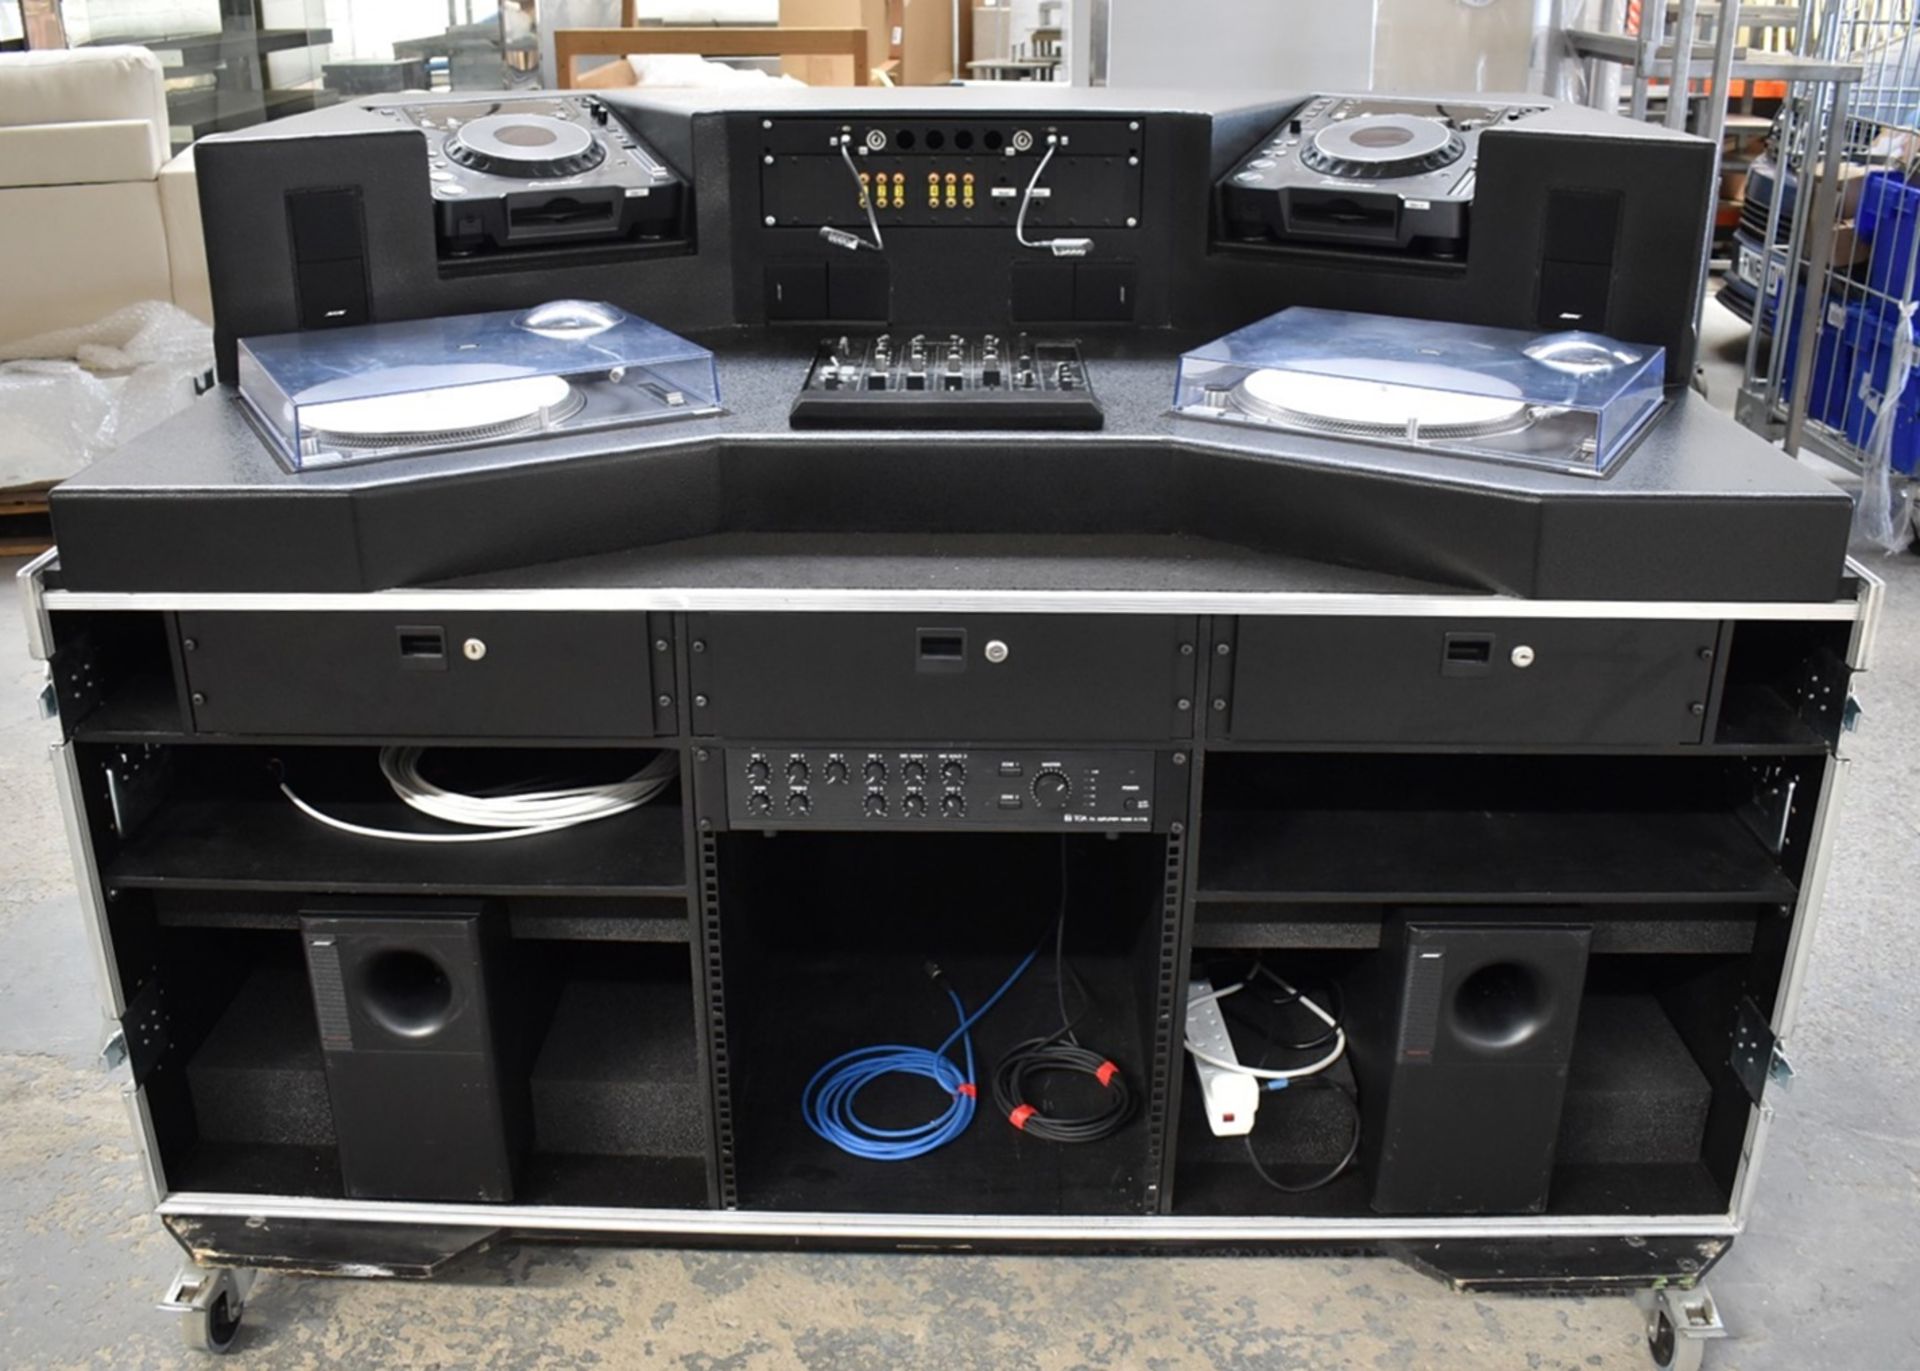 1 x Mobile DJ Booth in Shock Solutions Flight Case - Features Equipment By Pioneer, Technics & Bose! - Image 48 of 95